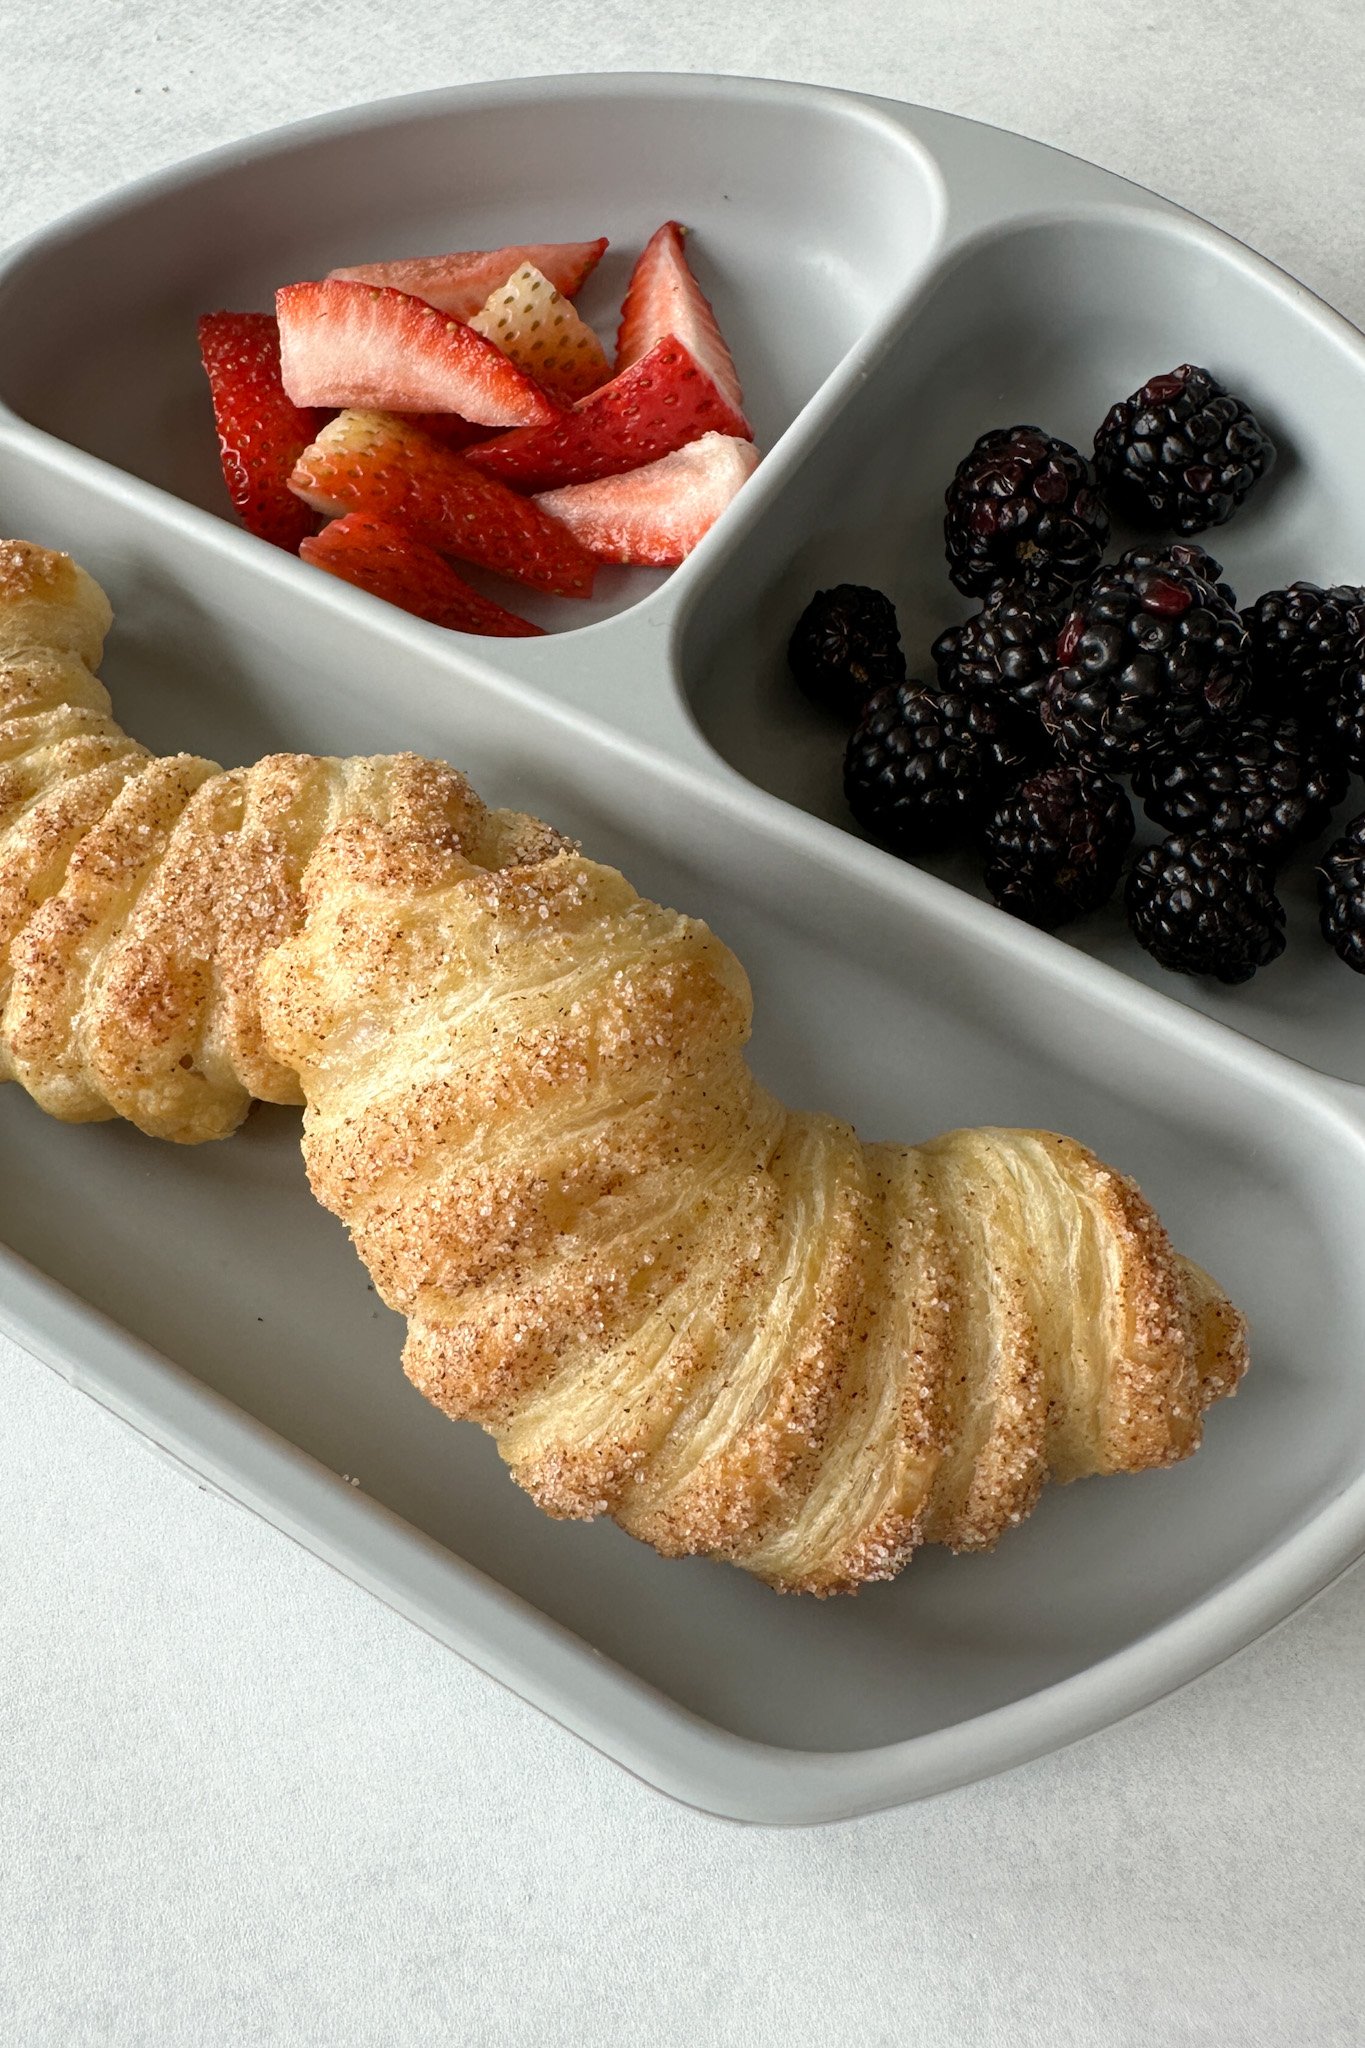 Apple croissants served with berries.